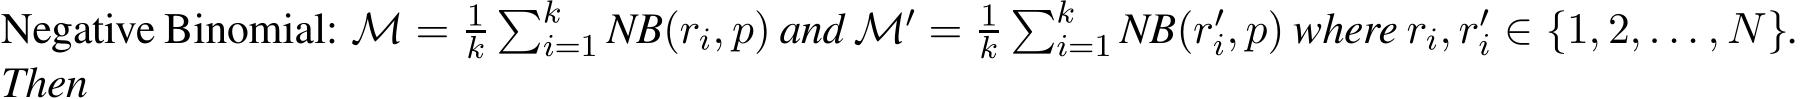  M = 1k�ki=1 NB(ri, p) and M′ = 1k�ki=1 NB(r′i, p) where ri, r′i ∈ {1, 2, . . . , N}.Then